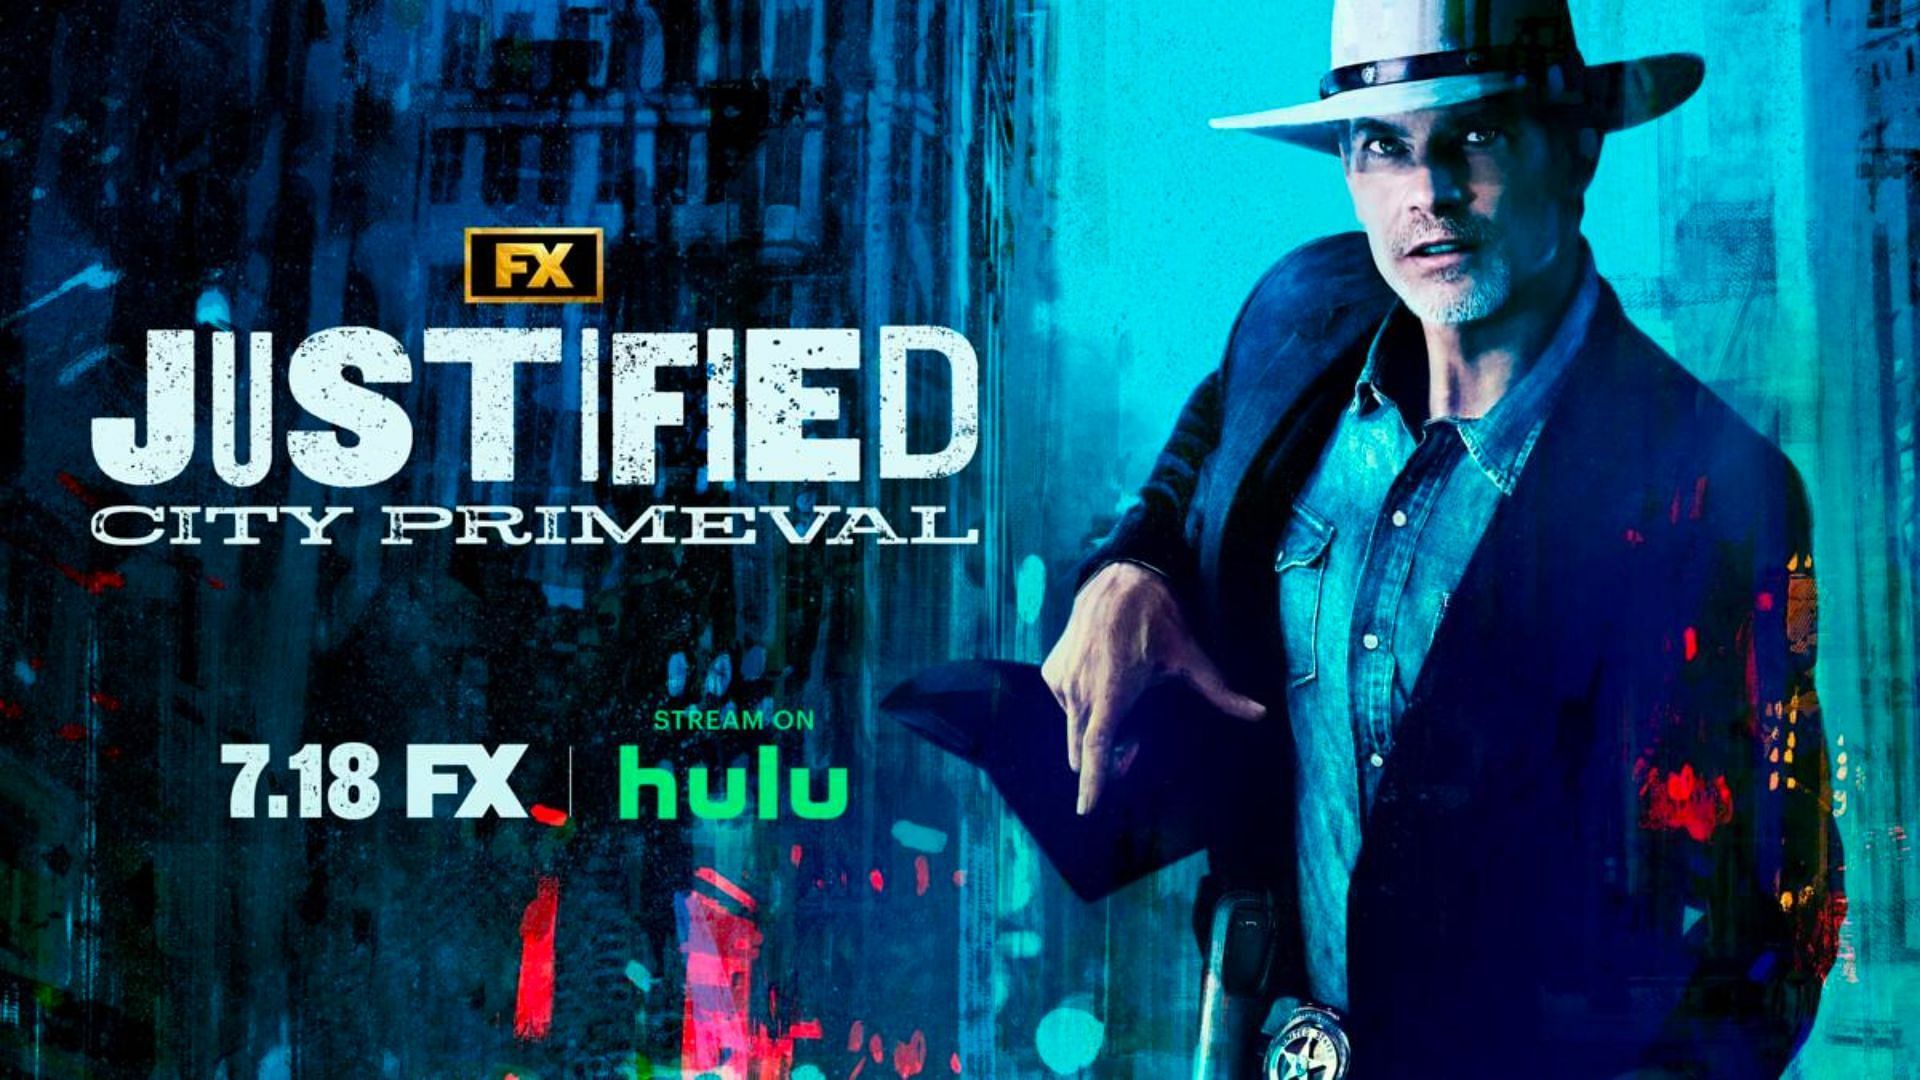 Justified is about a Southern lawman (Image via Hulu)